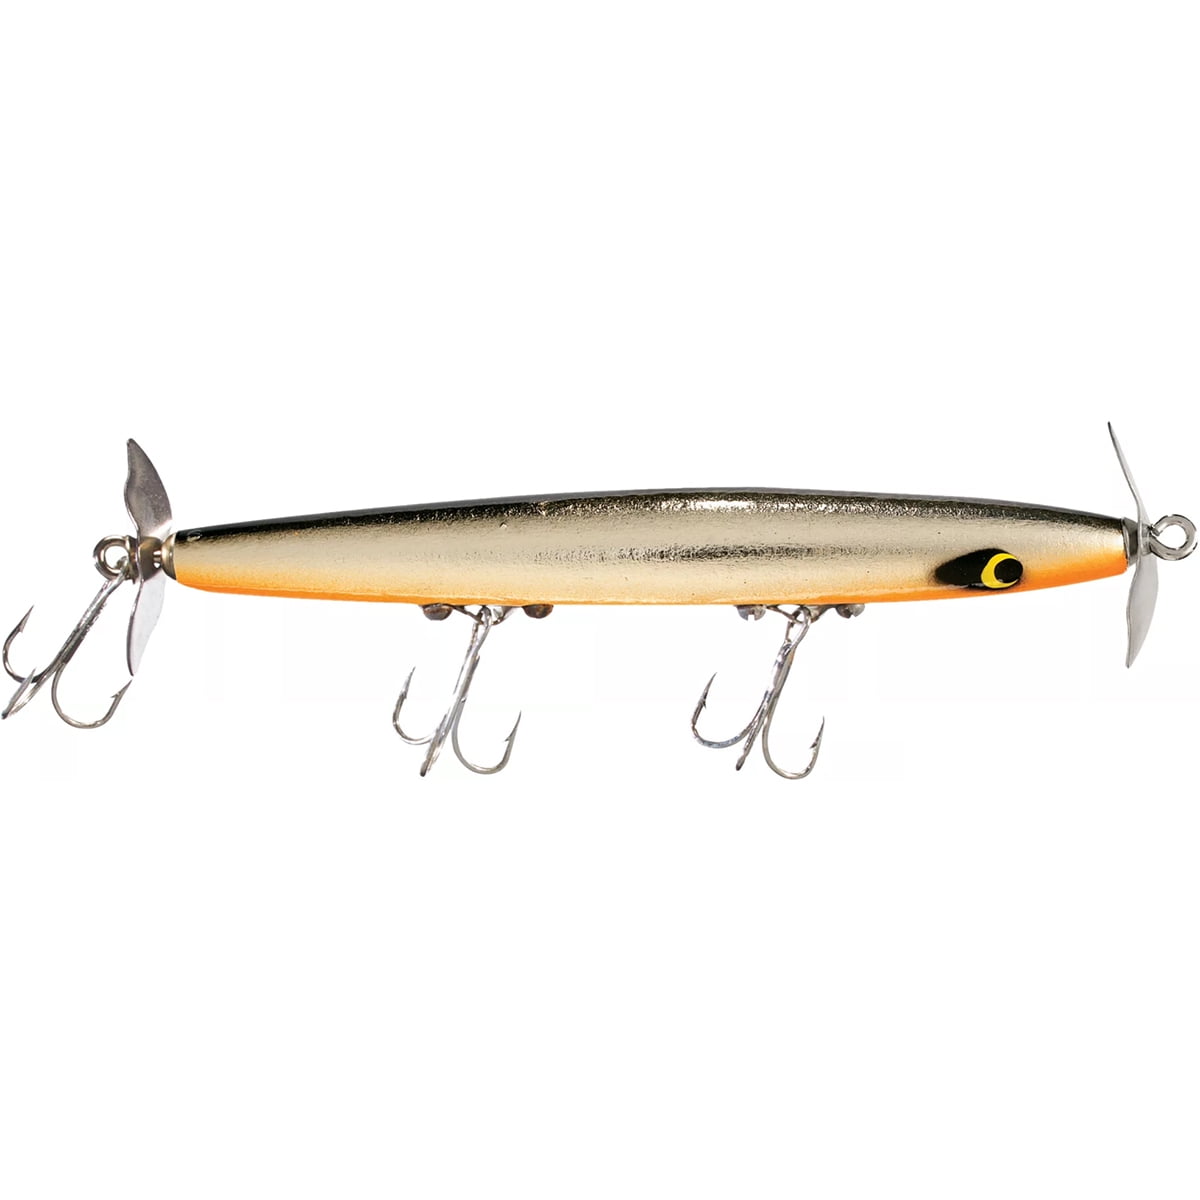 Smithwick Devils Horse 3/8 oz Surface Fishing Lure - Tennessee Shad